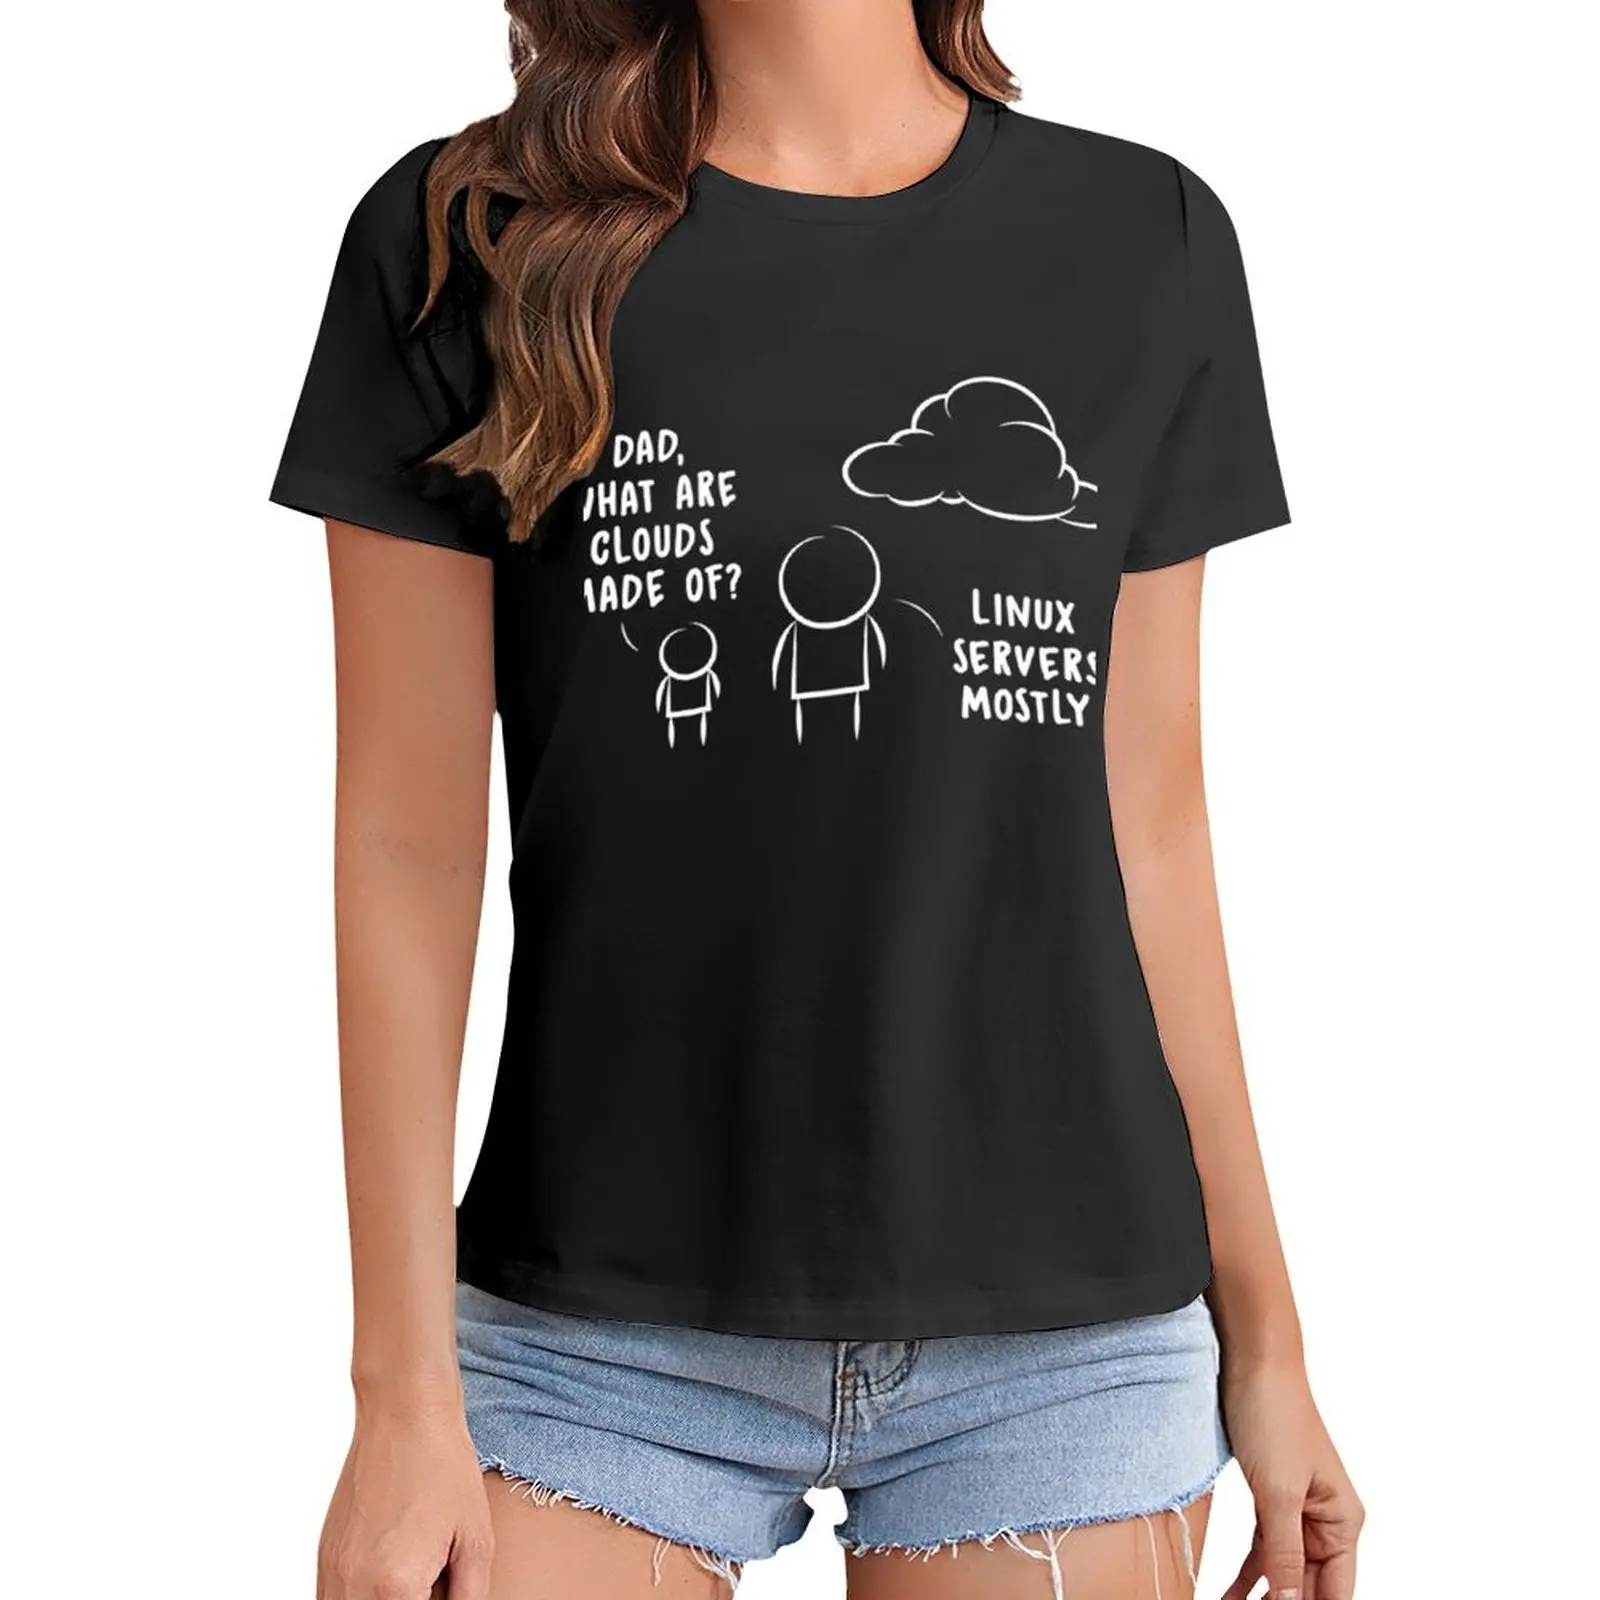 

Dad, What Are Clouds Made Of T-Shirt summer top summer clothes plain t-shirts for Women cotton